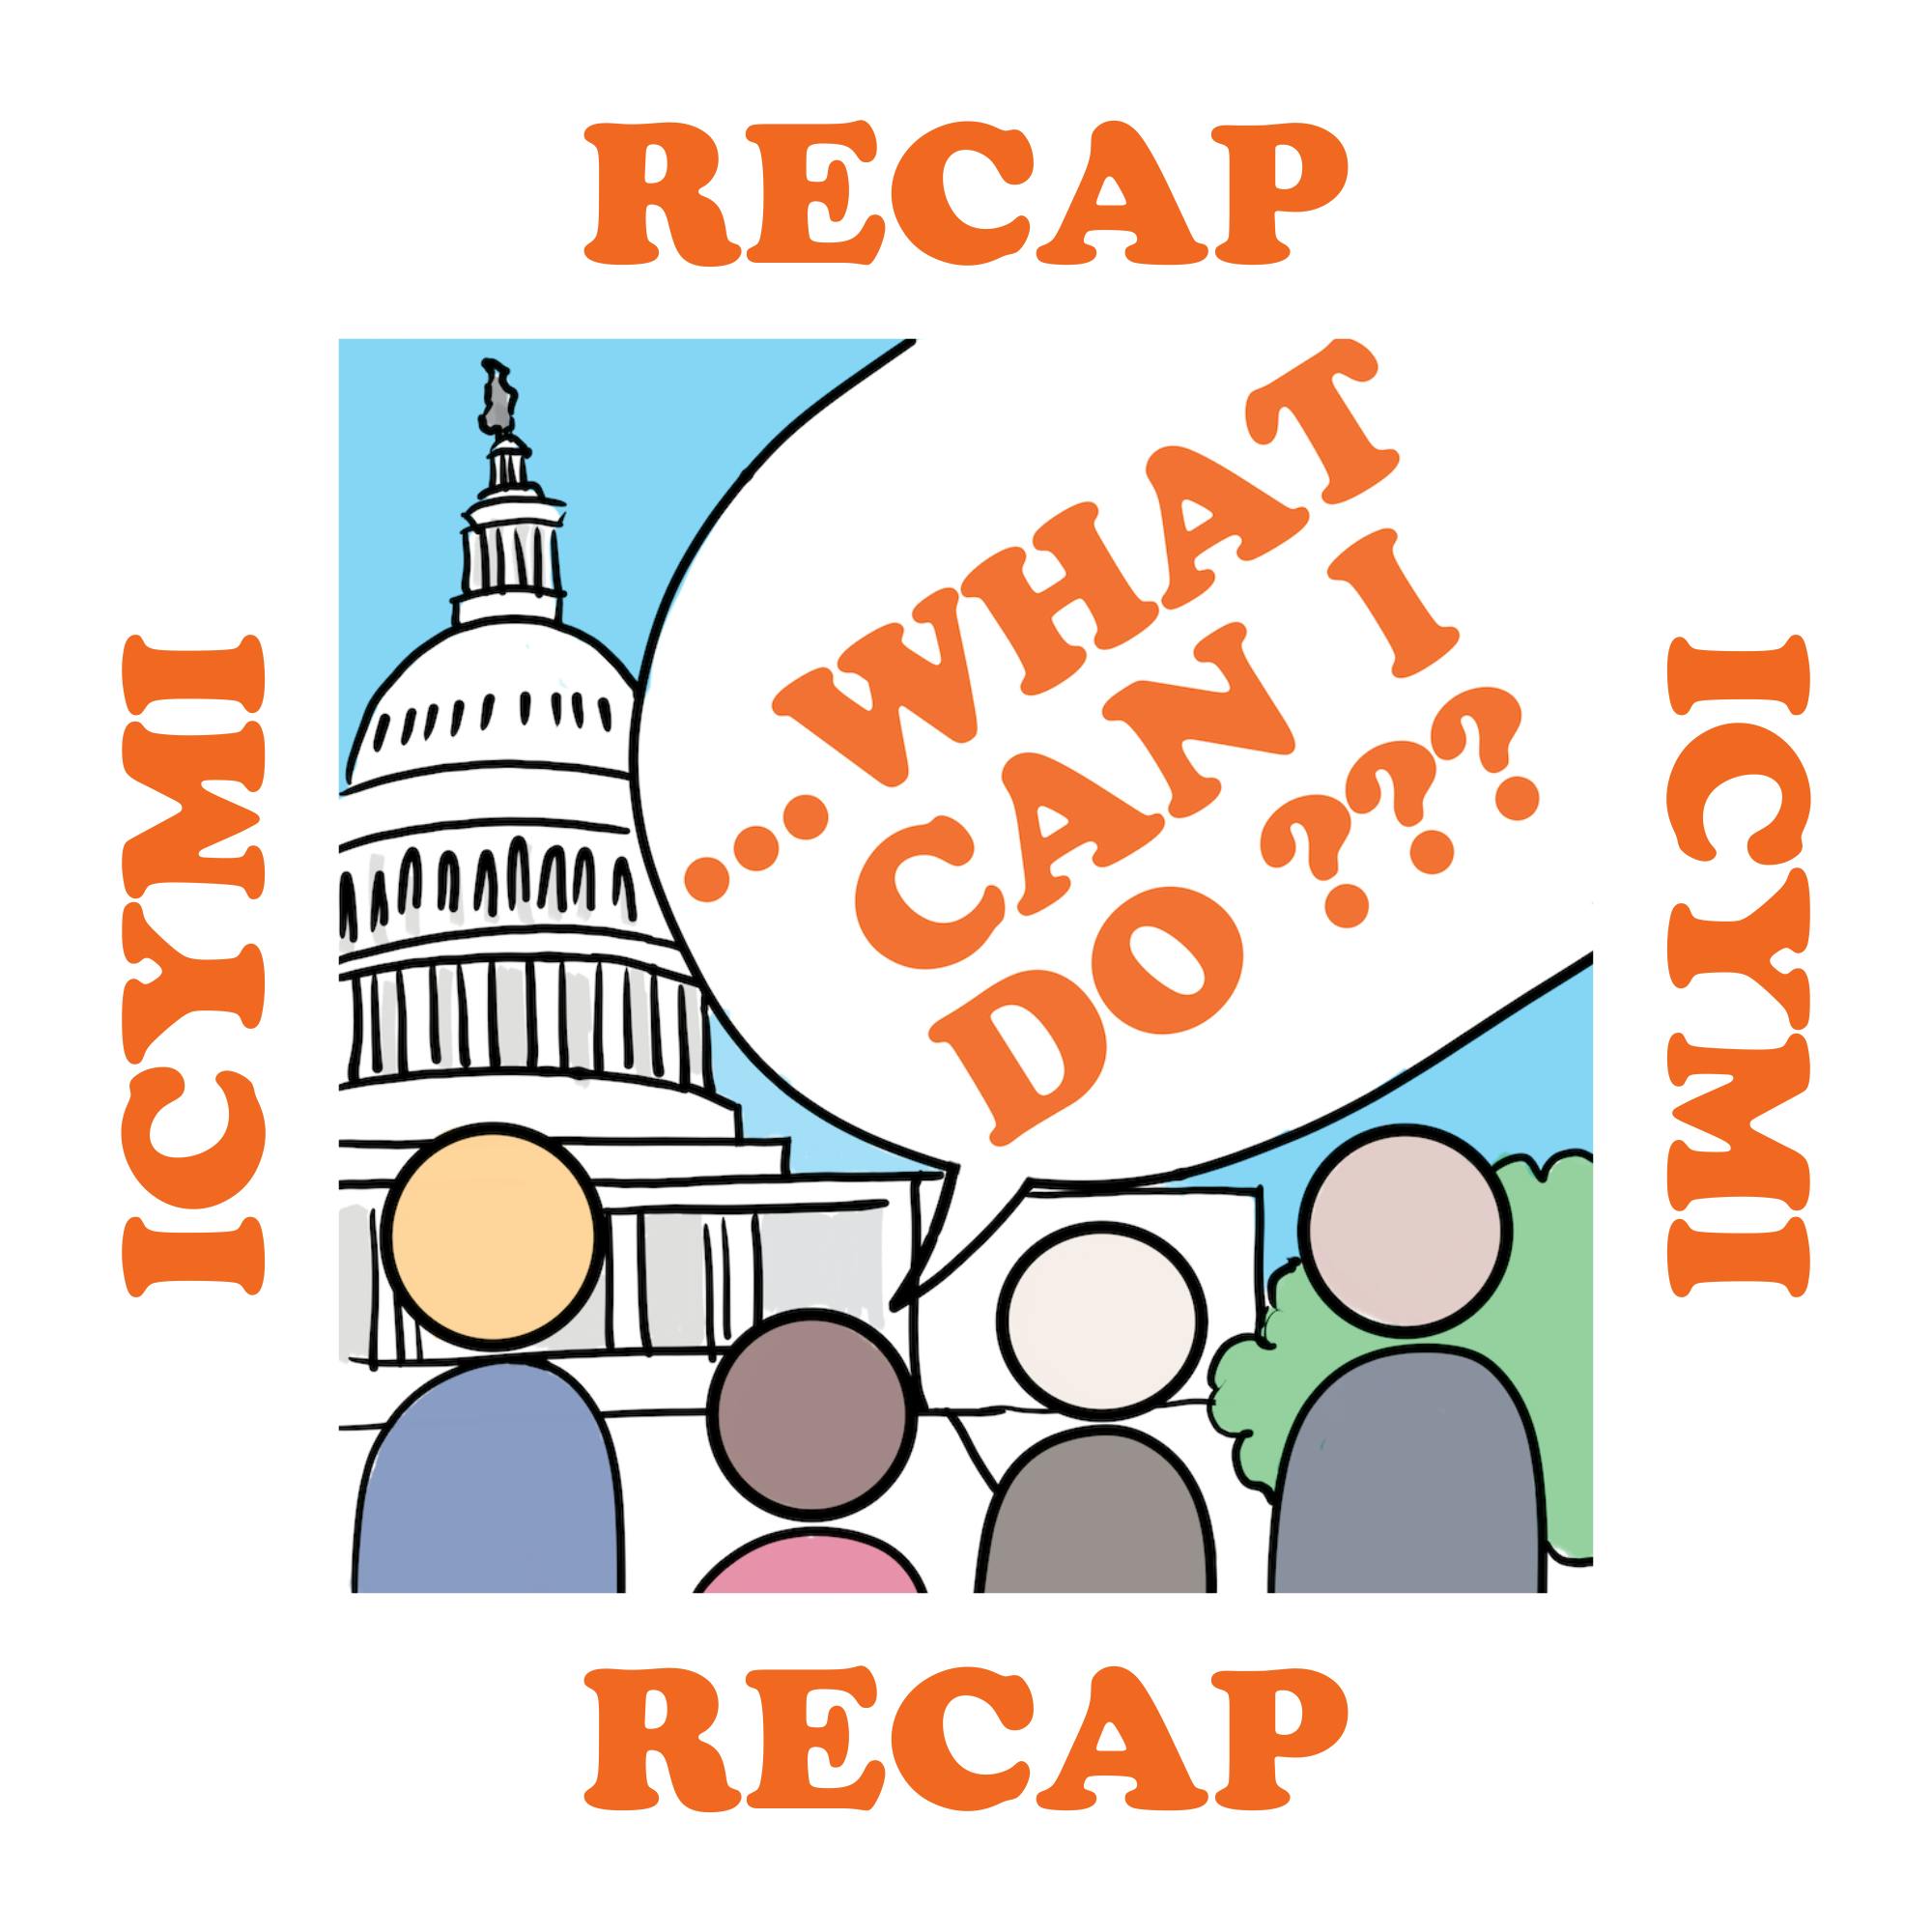 ICYMI - Recap 2 (aka, What Can I Do After the Midterms)